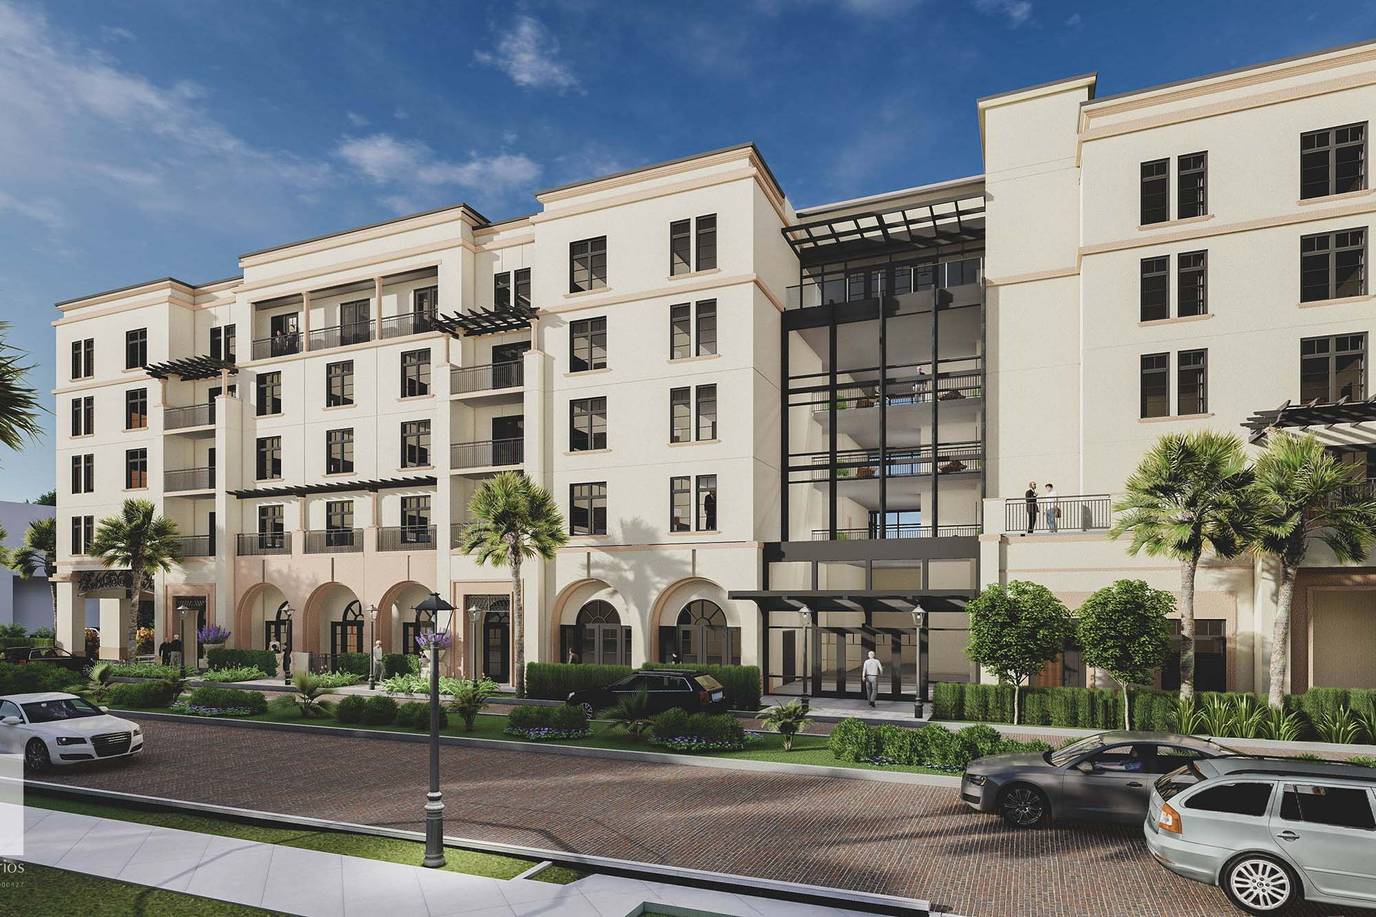 Rendering of the front exterior of the new Alfond Inn expansion.